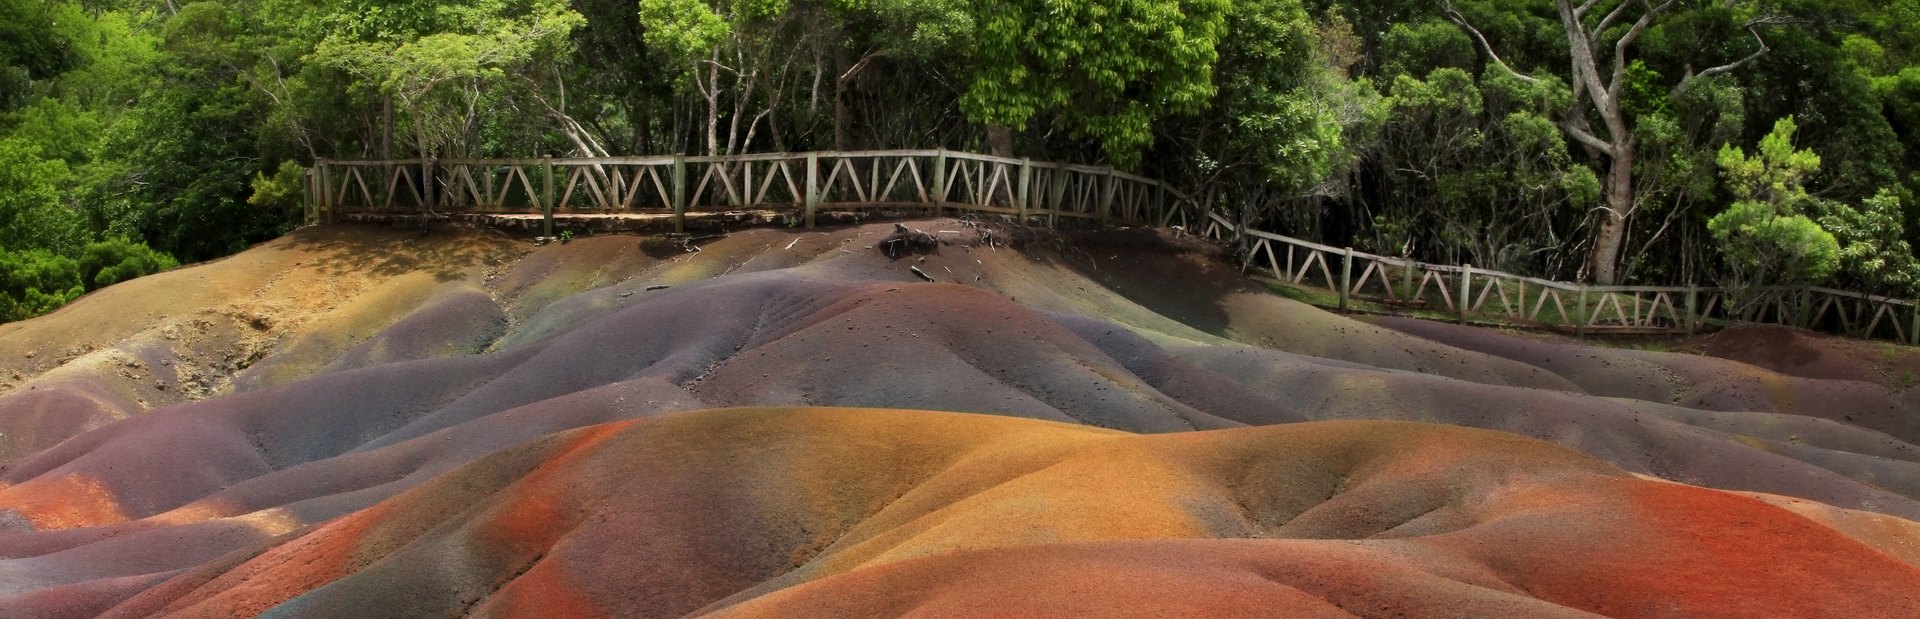 Colourful soil in front of the fenced forest